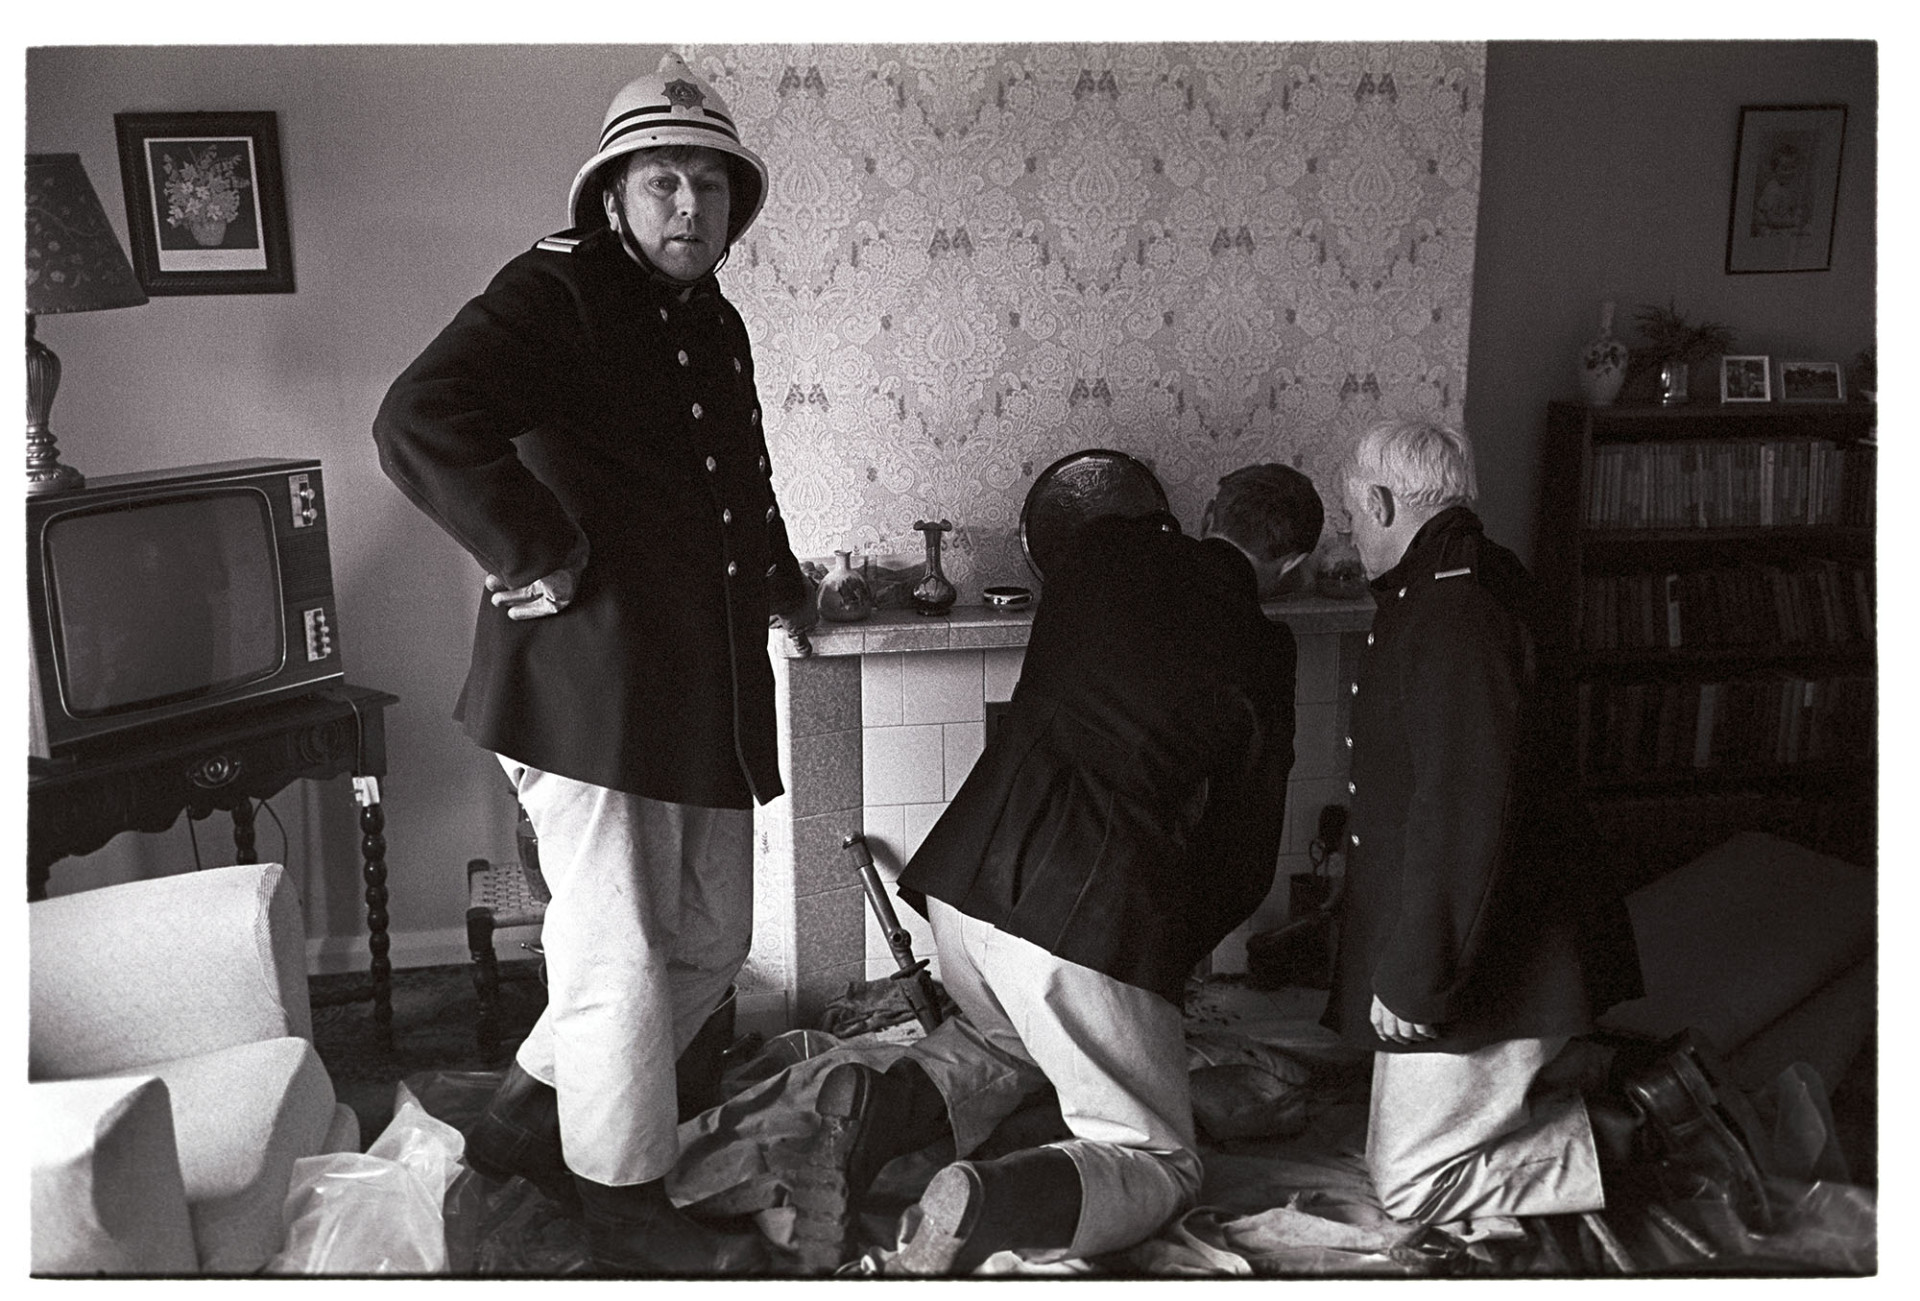 Firemen at chimney fire, clearing out mess in sitting room fireplace. 
[Firemen from Hatherleigh Fire Brigade attending a chimney fire at a house in West Lane, Dolton. They are clearing the fireplace in the sitting room of the house. A chair, television and patterned wallpaper are visible in the room.]